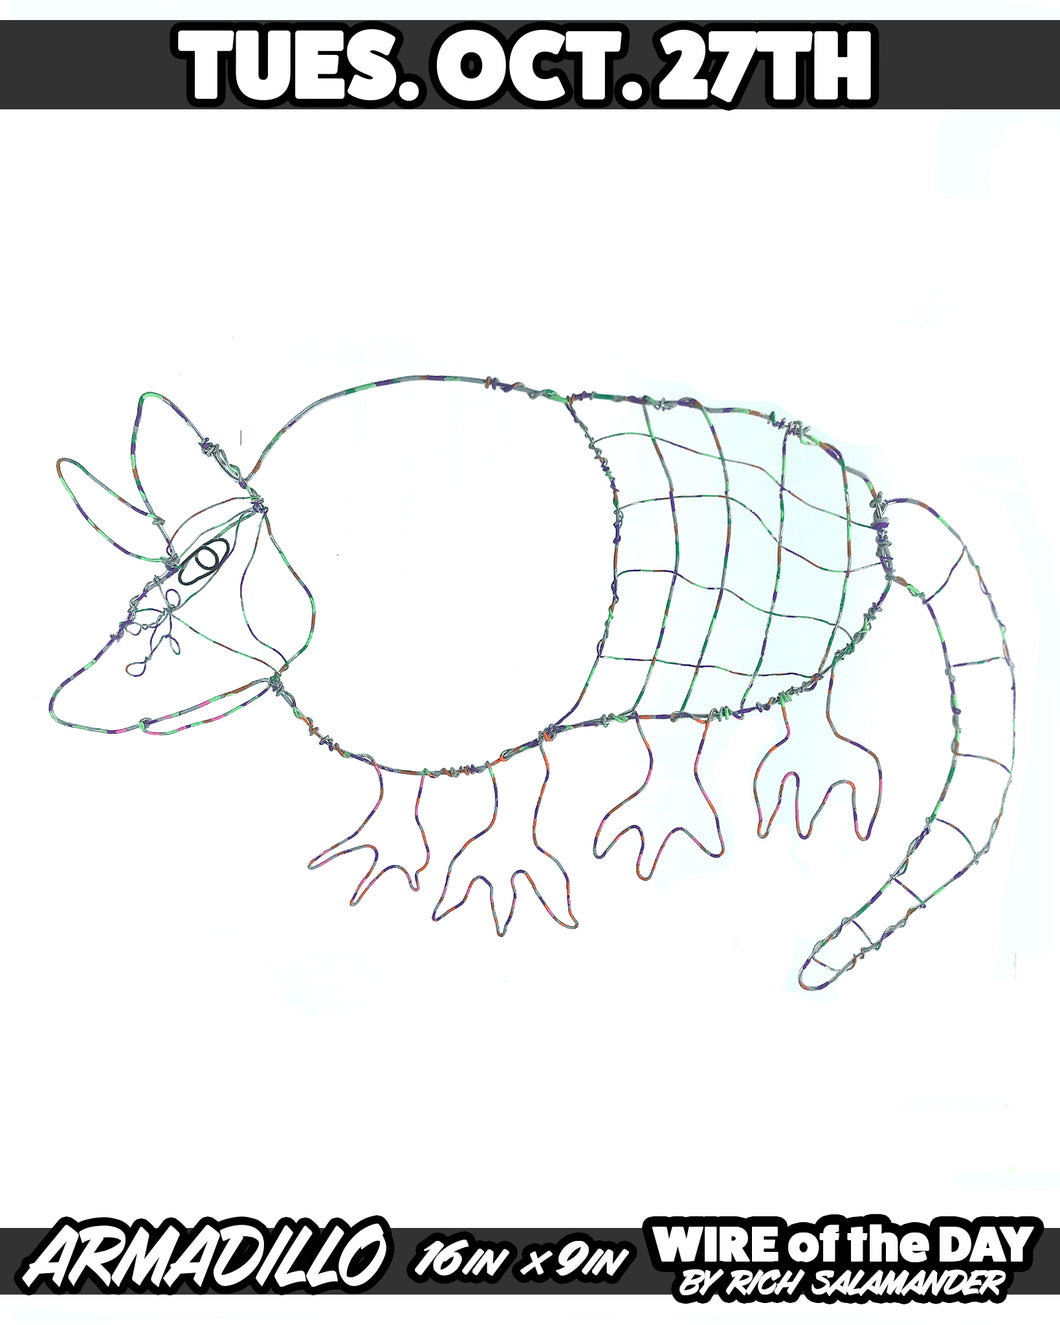 WIRE of the DAY ARMADILLO